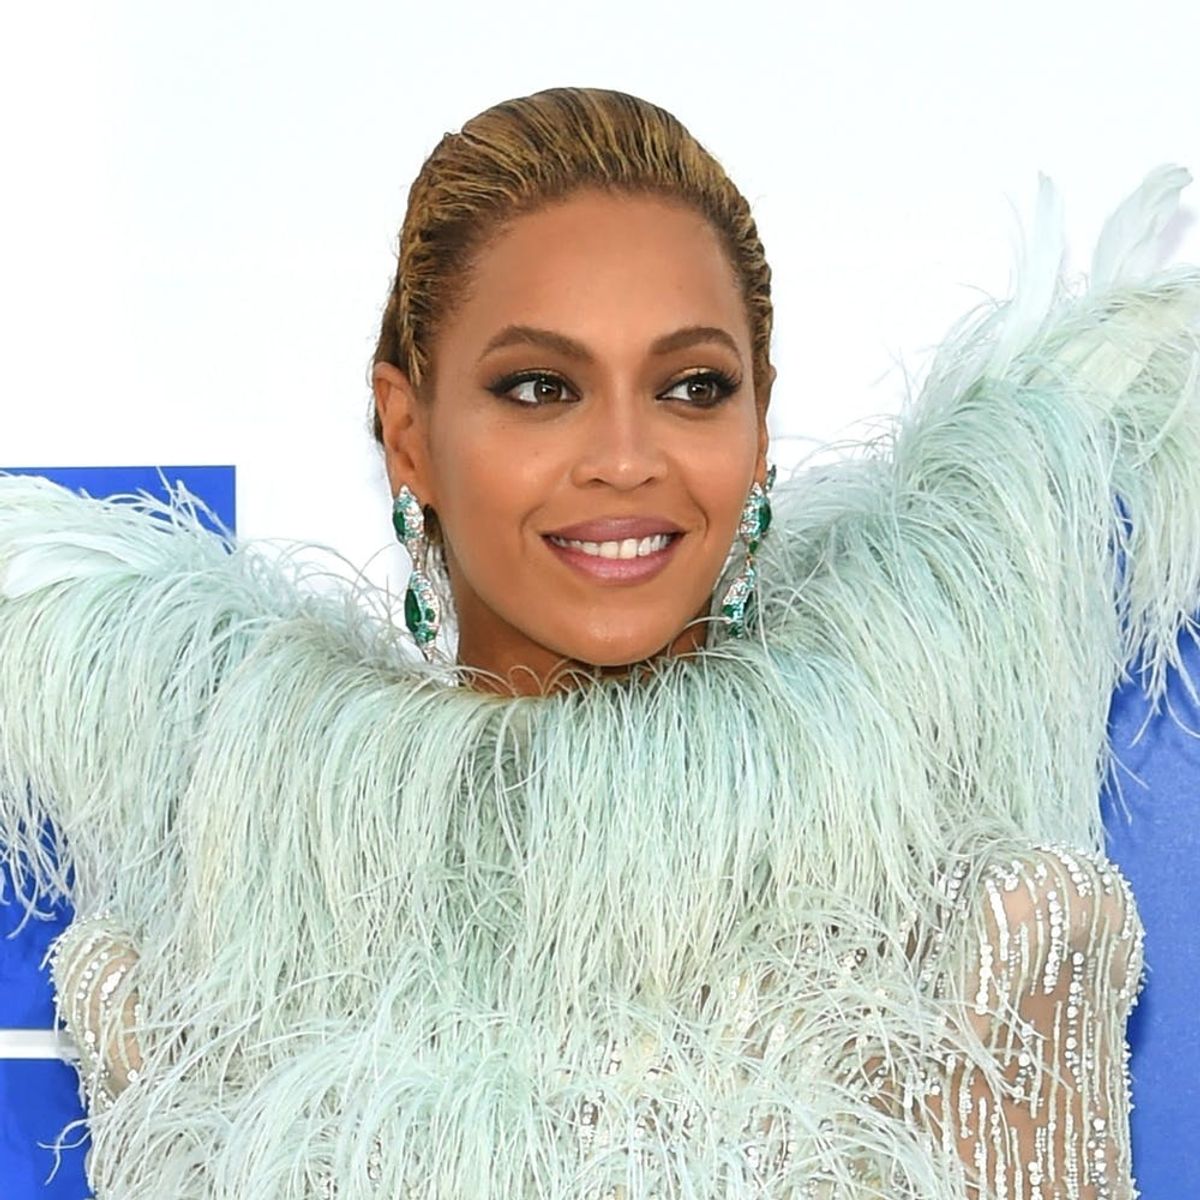 These Are the Must-See Looks from the 2016 VMAs Red Carpet